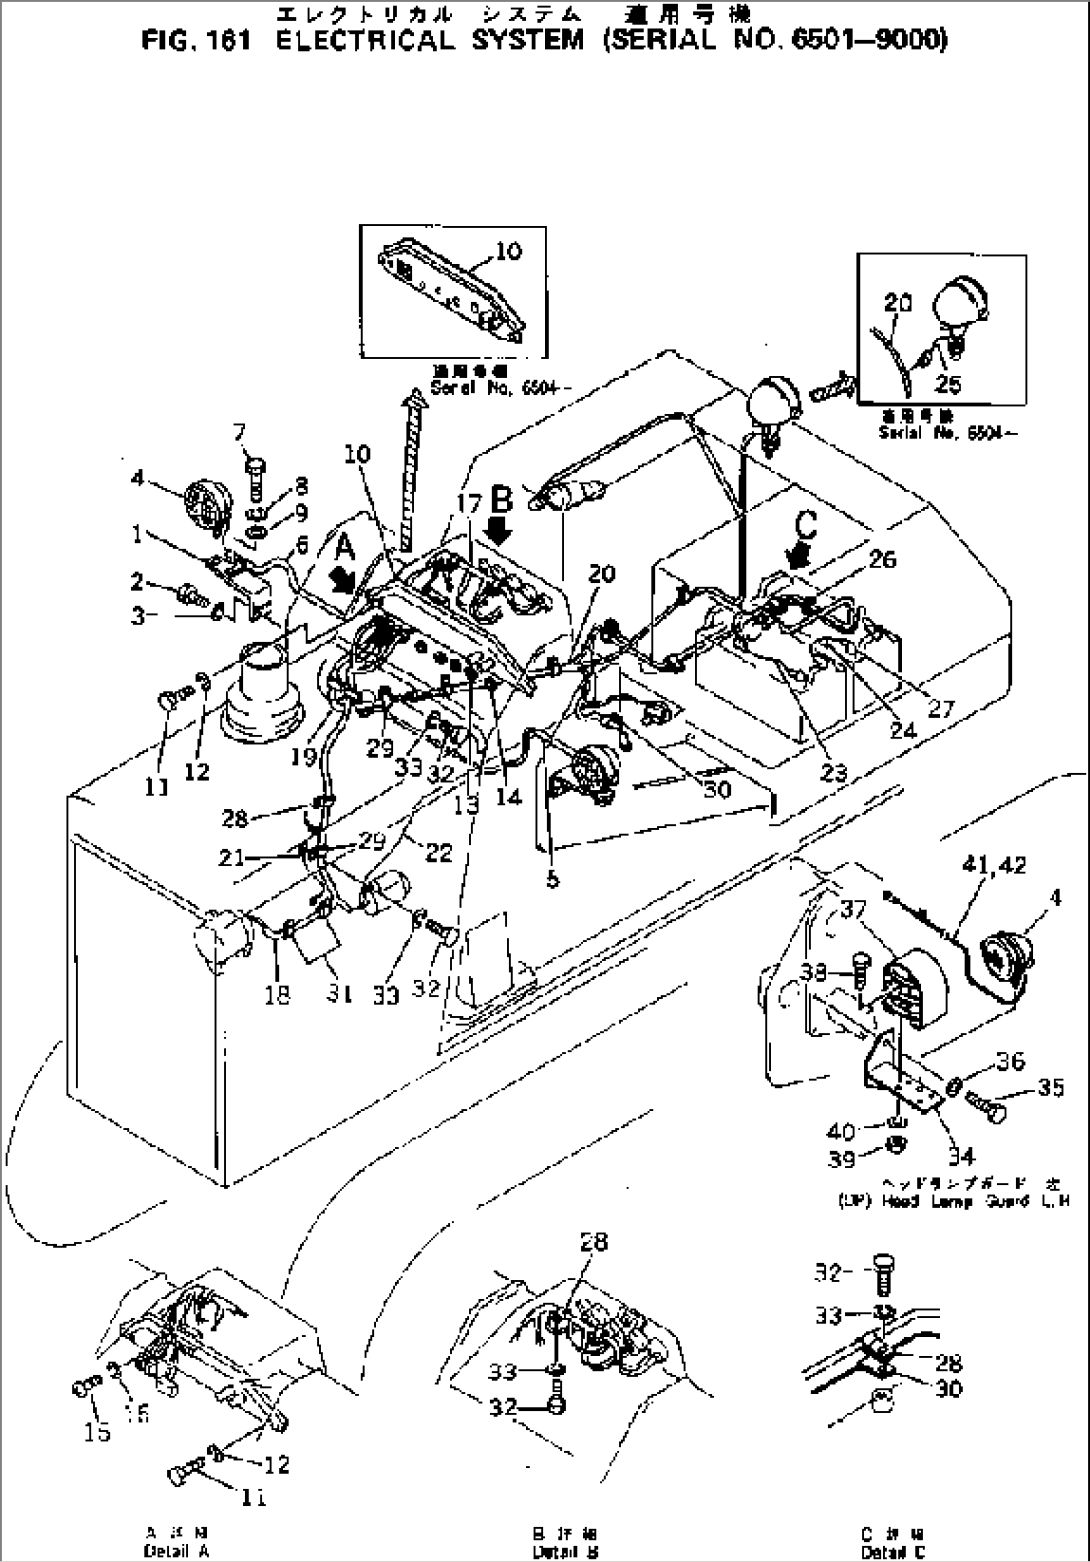 ELECTRICAL SYSTEM(#6501-9000)